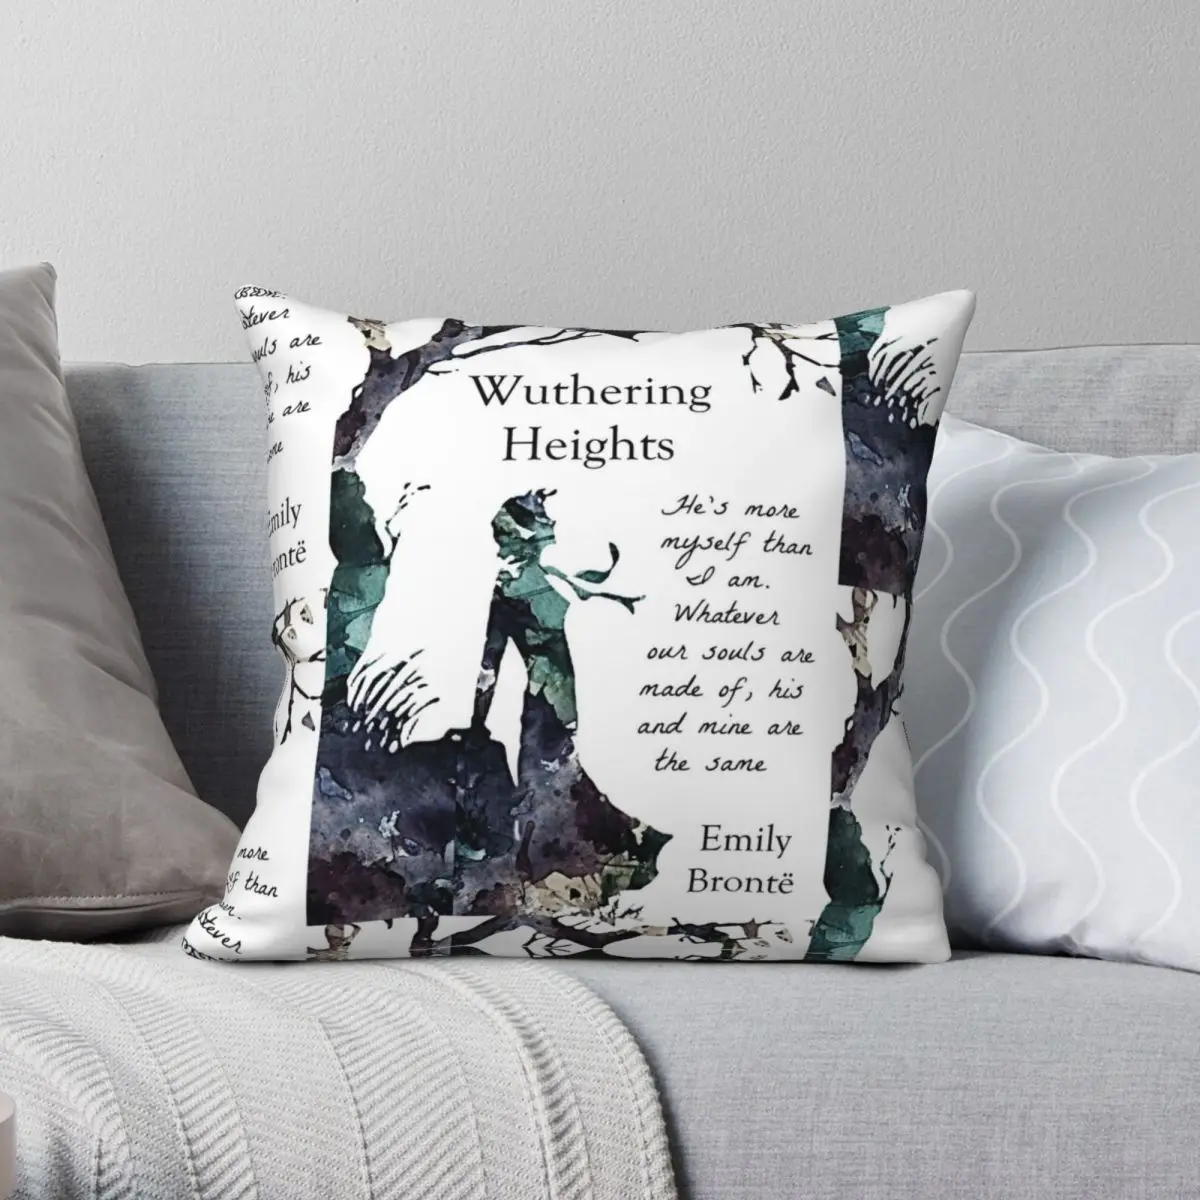 

Wuthering Heights Emily Bronte Square Pillowcase Polyester Linen Velvet Zip Decor Pillow Case Sofa Cushion Cover